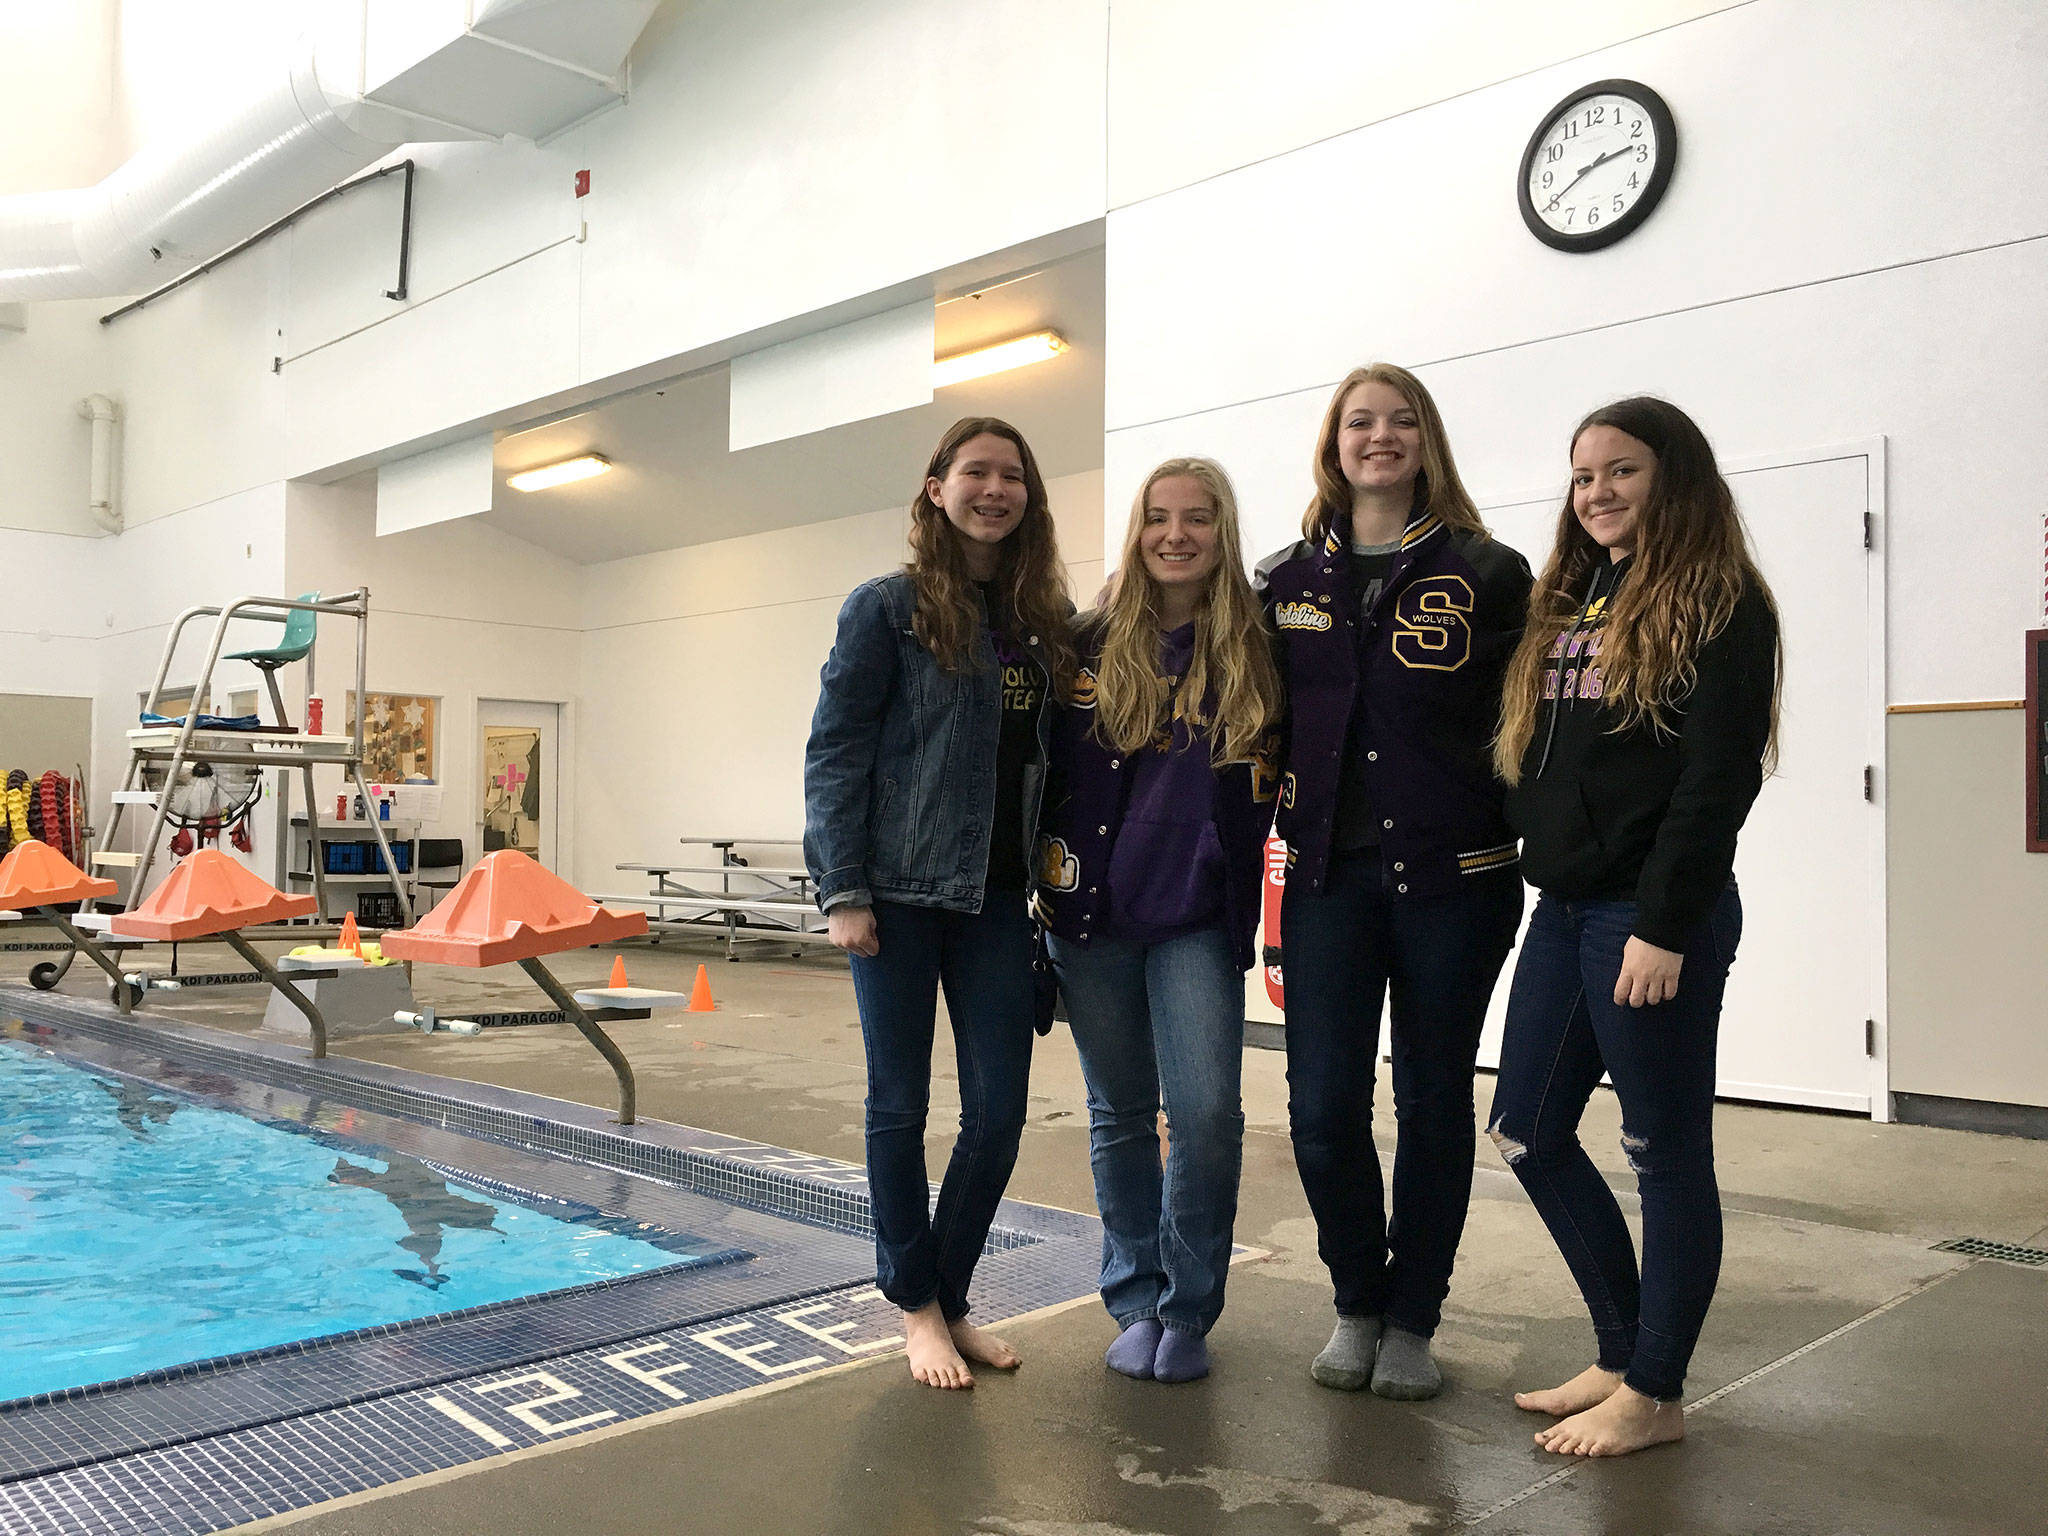 Sequim High School girls swim team members, from left, Sonja Govertsen, Annie Armstrong, Madeline Patterson and Sydney Swanson, continue to help with an effort to install underwater touch pads and a scoreboard in the Sequim YMCA for its many teams. They set a $25,000 goal for mid-August through a GoFundMe online fundraiser and various fundraisers in the months to come. Sequim Gazette photo by Matthew Nash